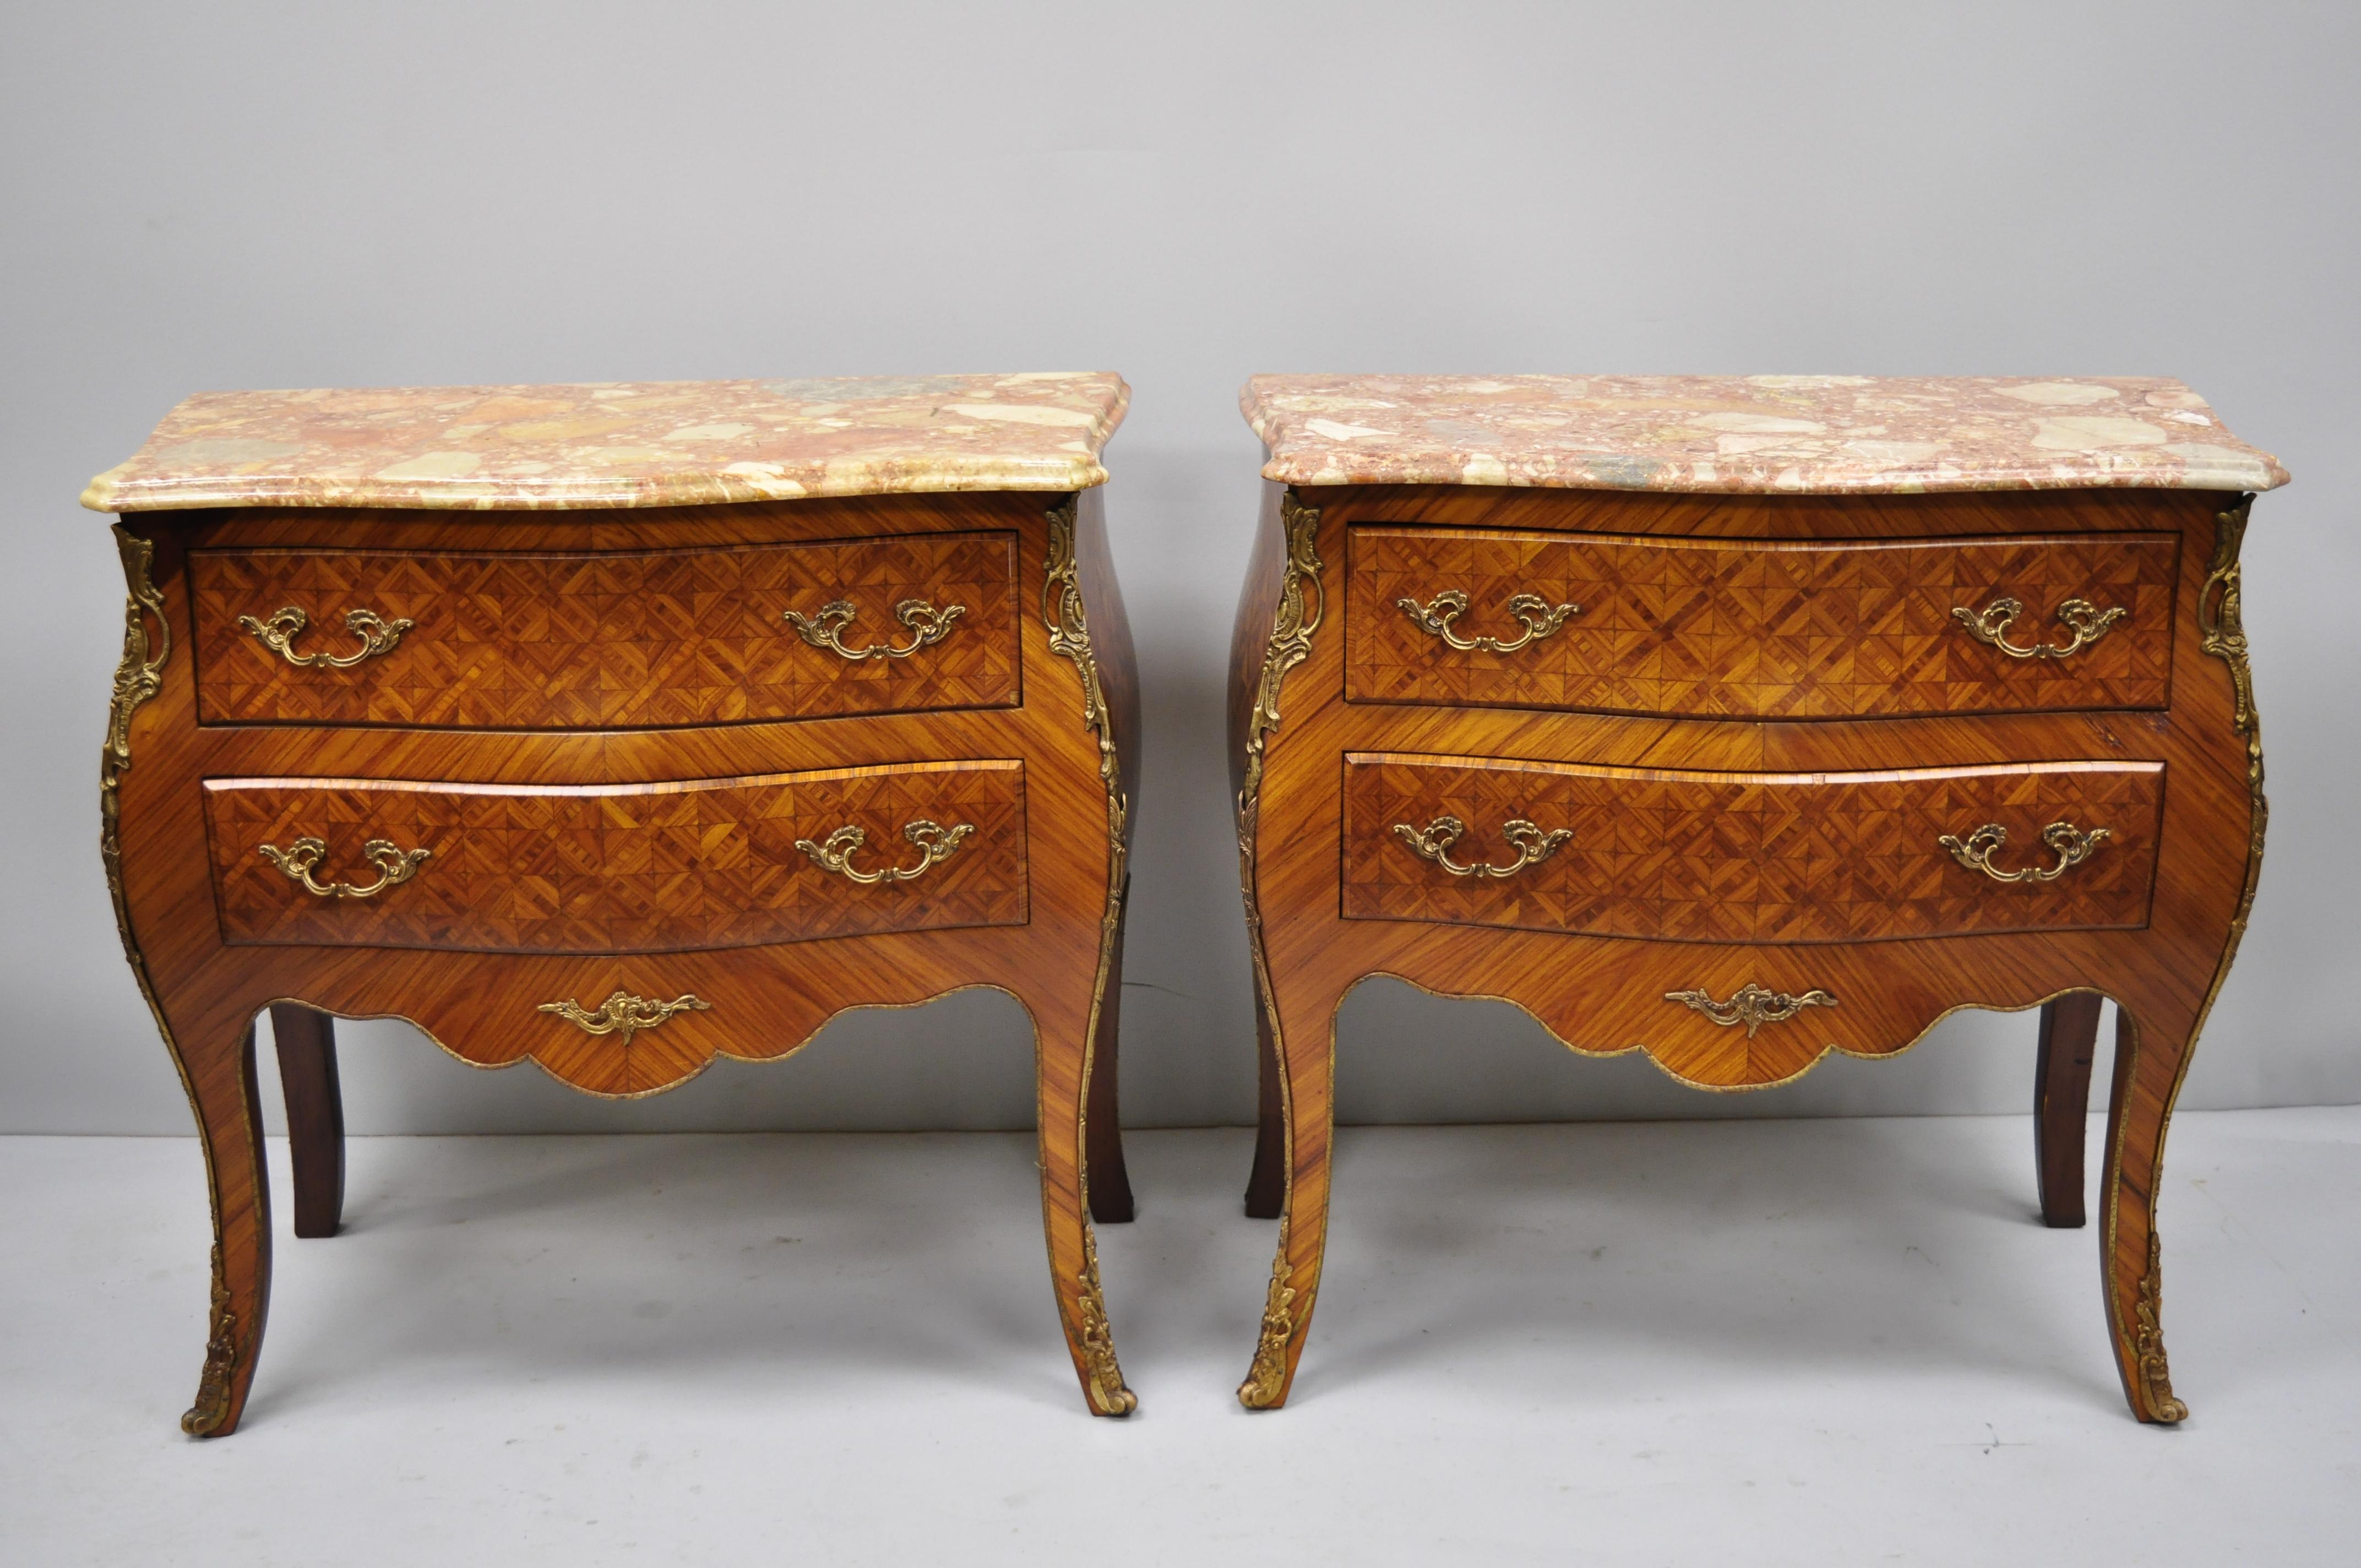 Pair of French Louis XV style pink marble-top inlaid bombe commode chests. Items include pink marble tops, beautiful parquetry inlay, bronze ormolu, shapely bombe form, 2 dovetailed drawers, cabriole legs, great style and form, circa late 20th